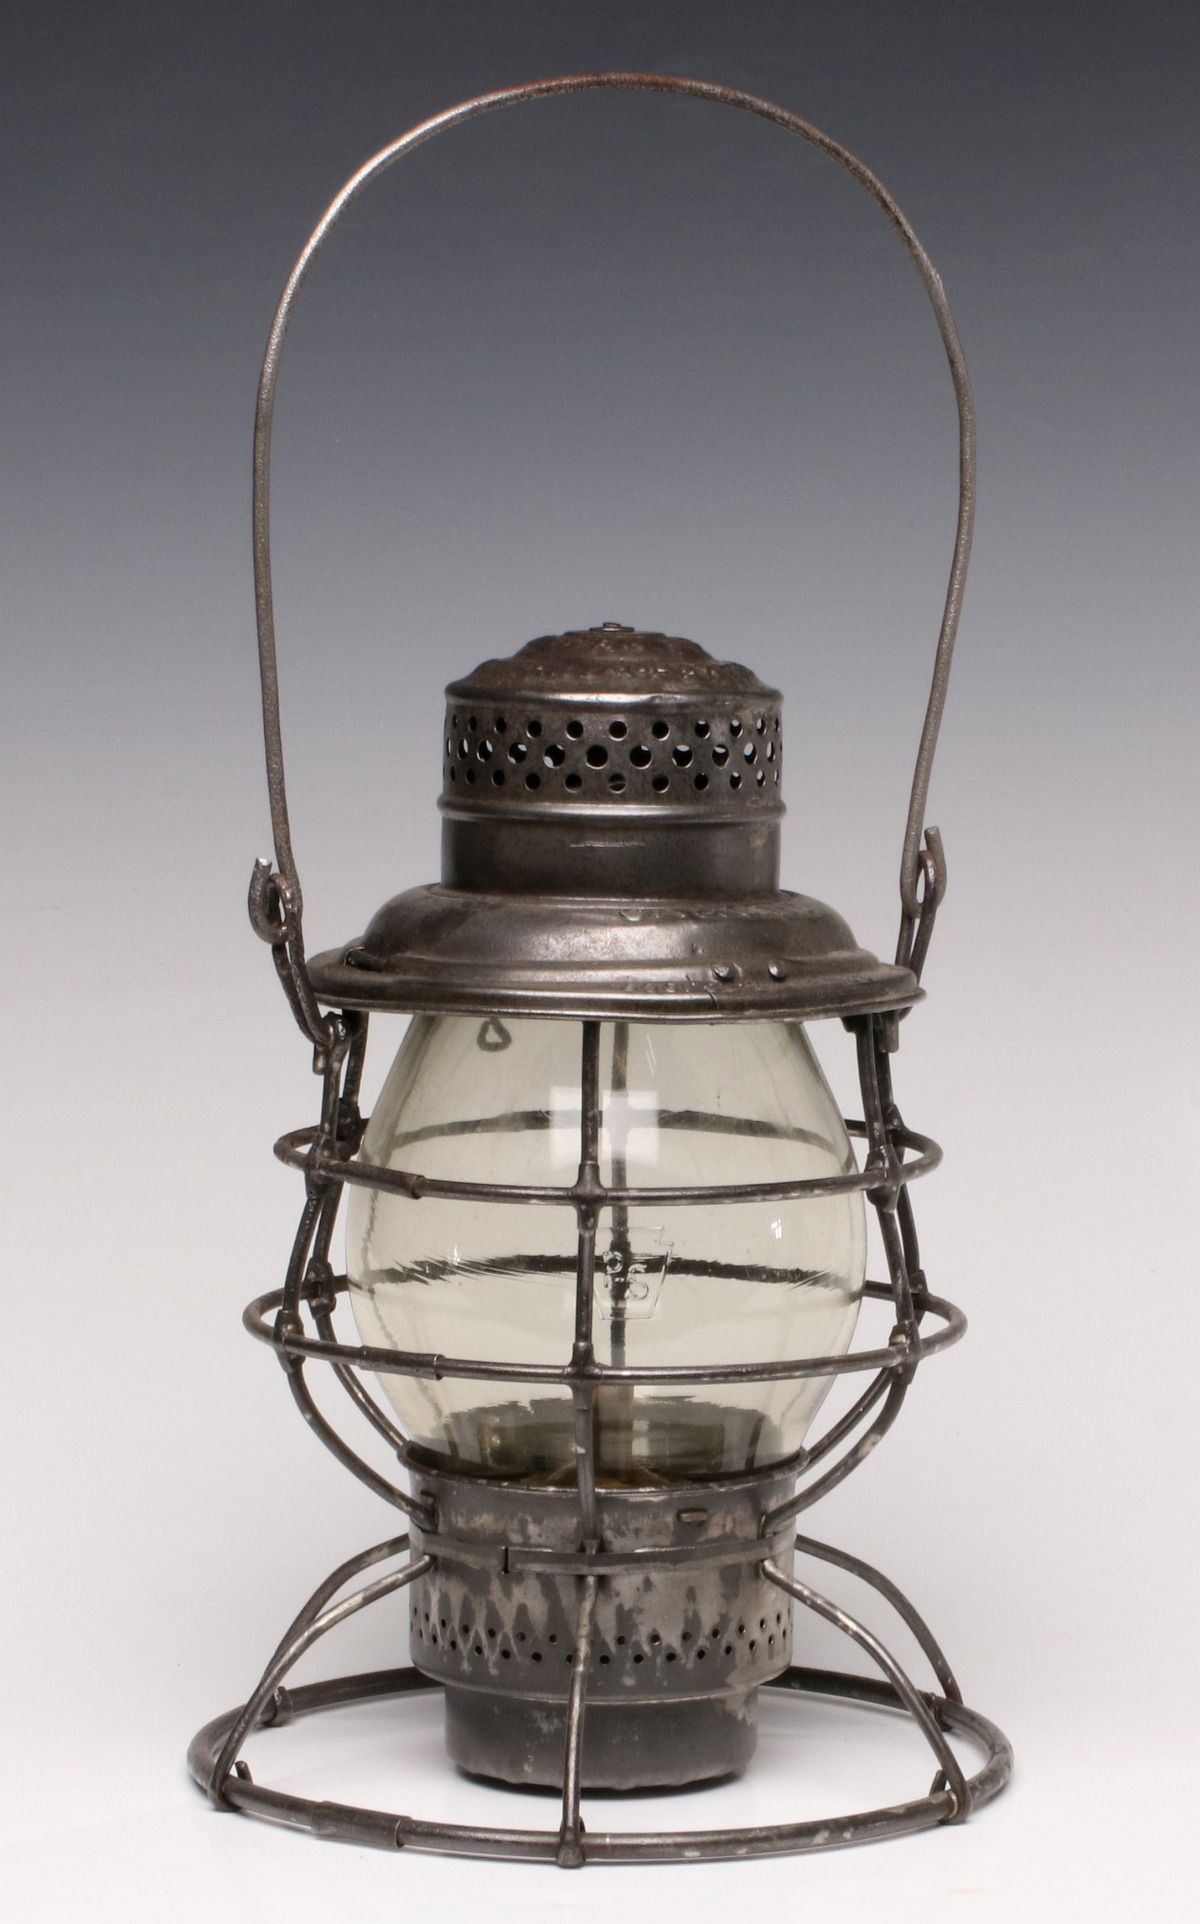 A CLEVELAND AKRON & COLUMBUS RR LANTERN WITH PS GLOBE